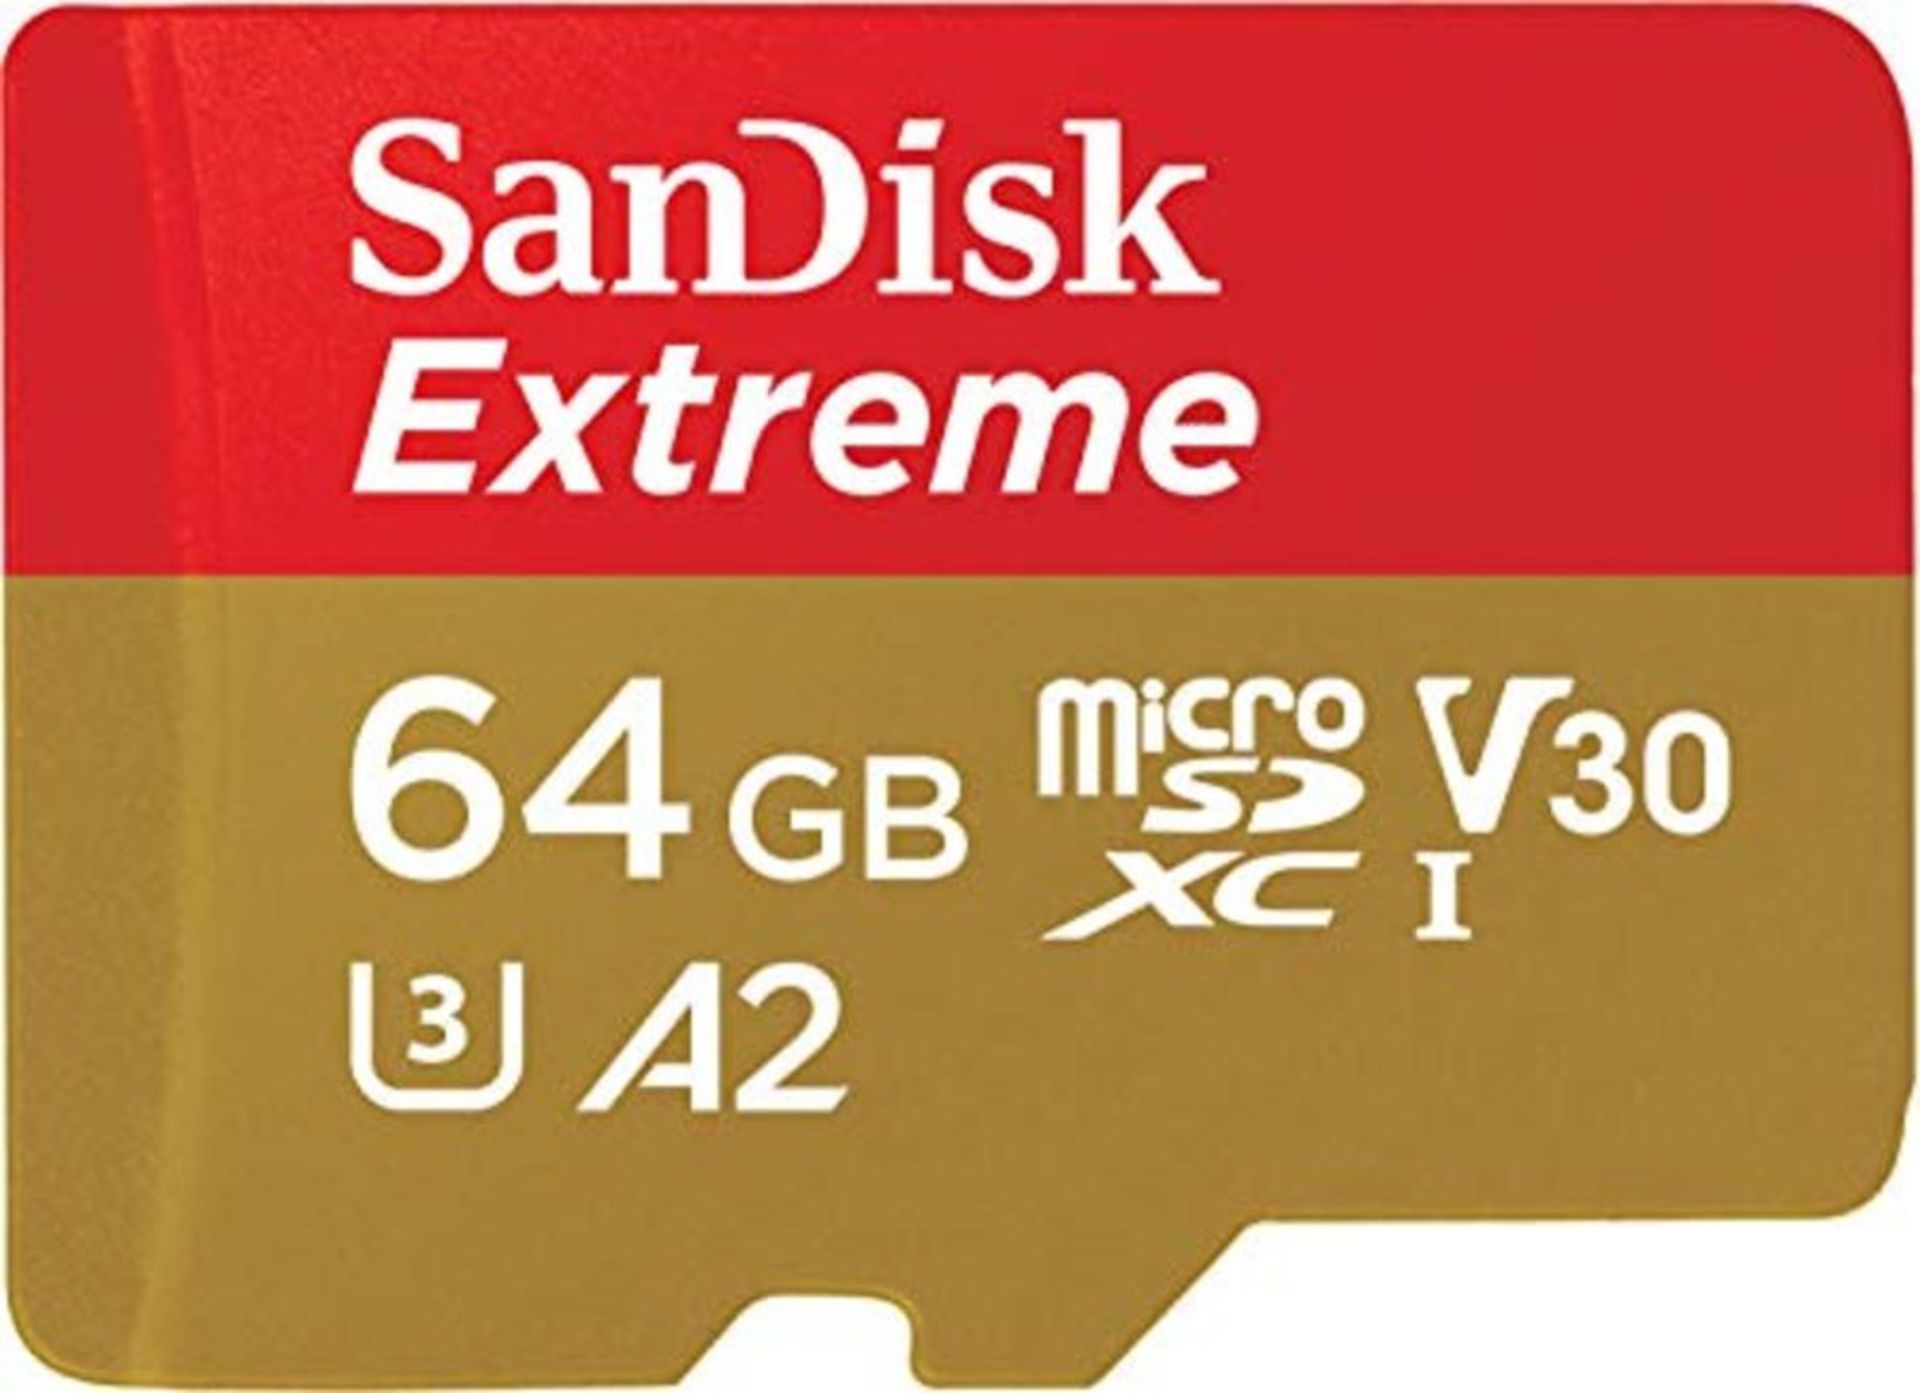 SanDisk Extreme microSDXC 64GB + SD Adapter + Rescue Pro Deluxe 160MB/s A2 C10 V30 UHS